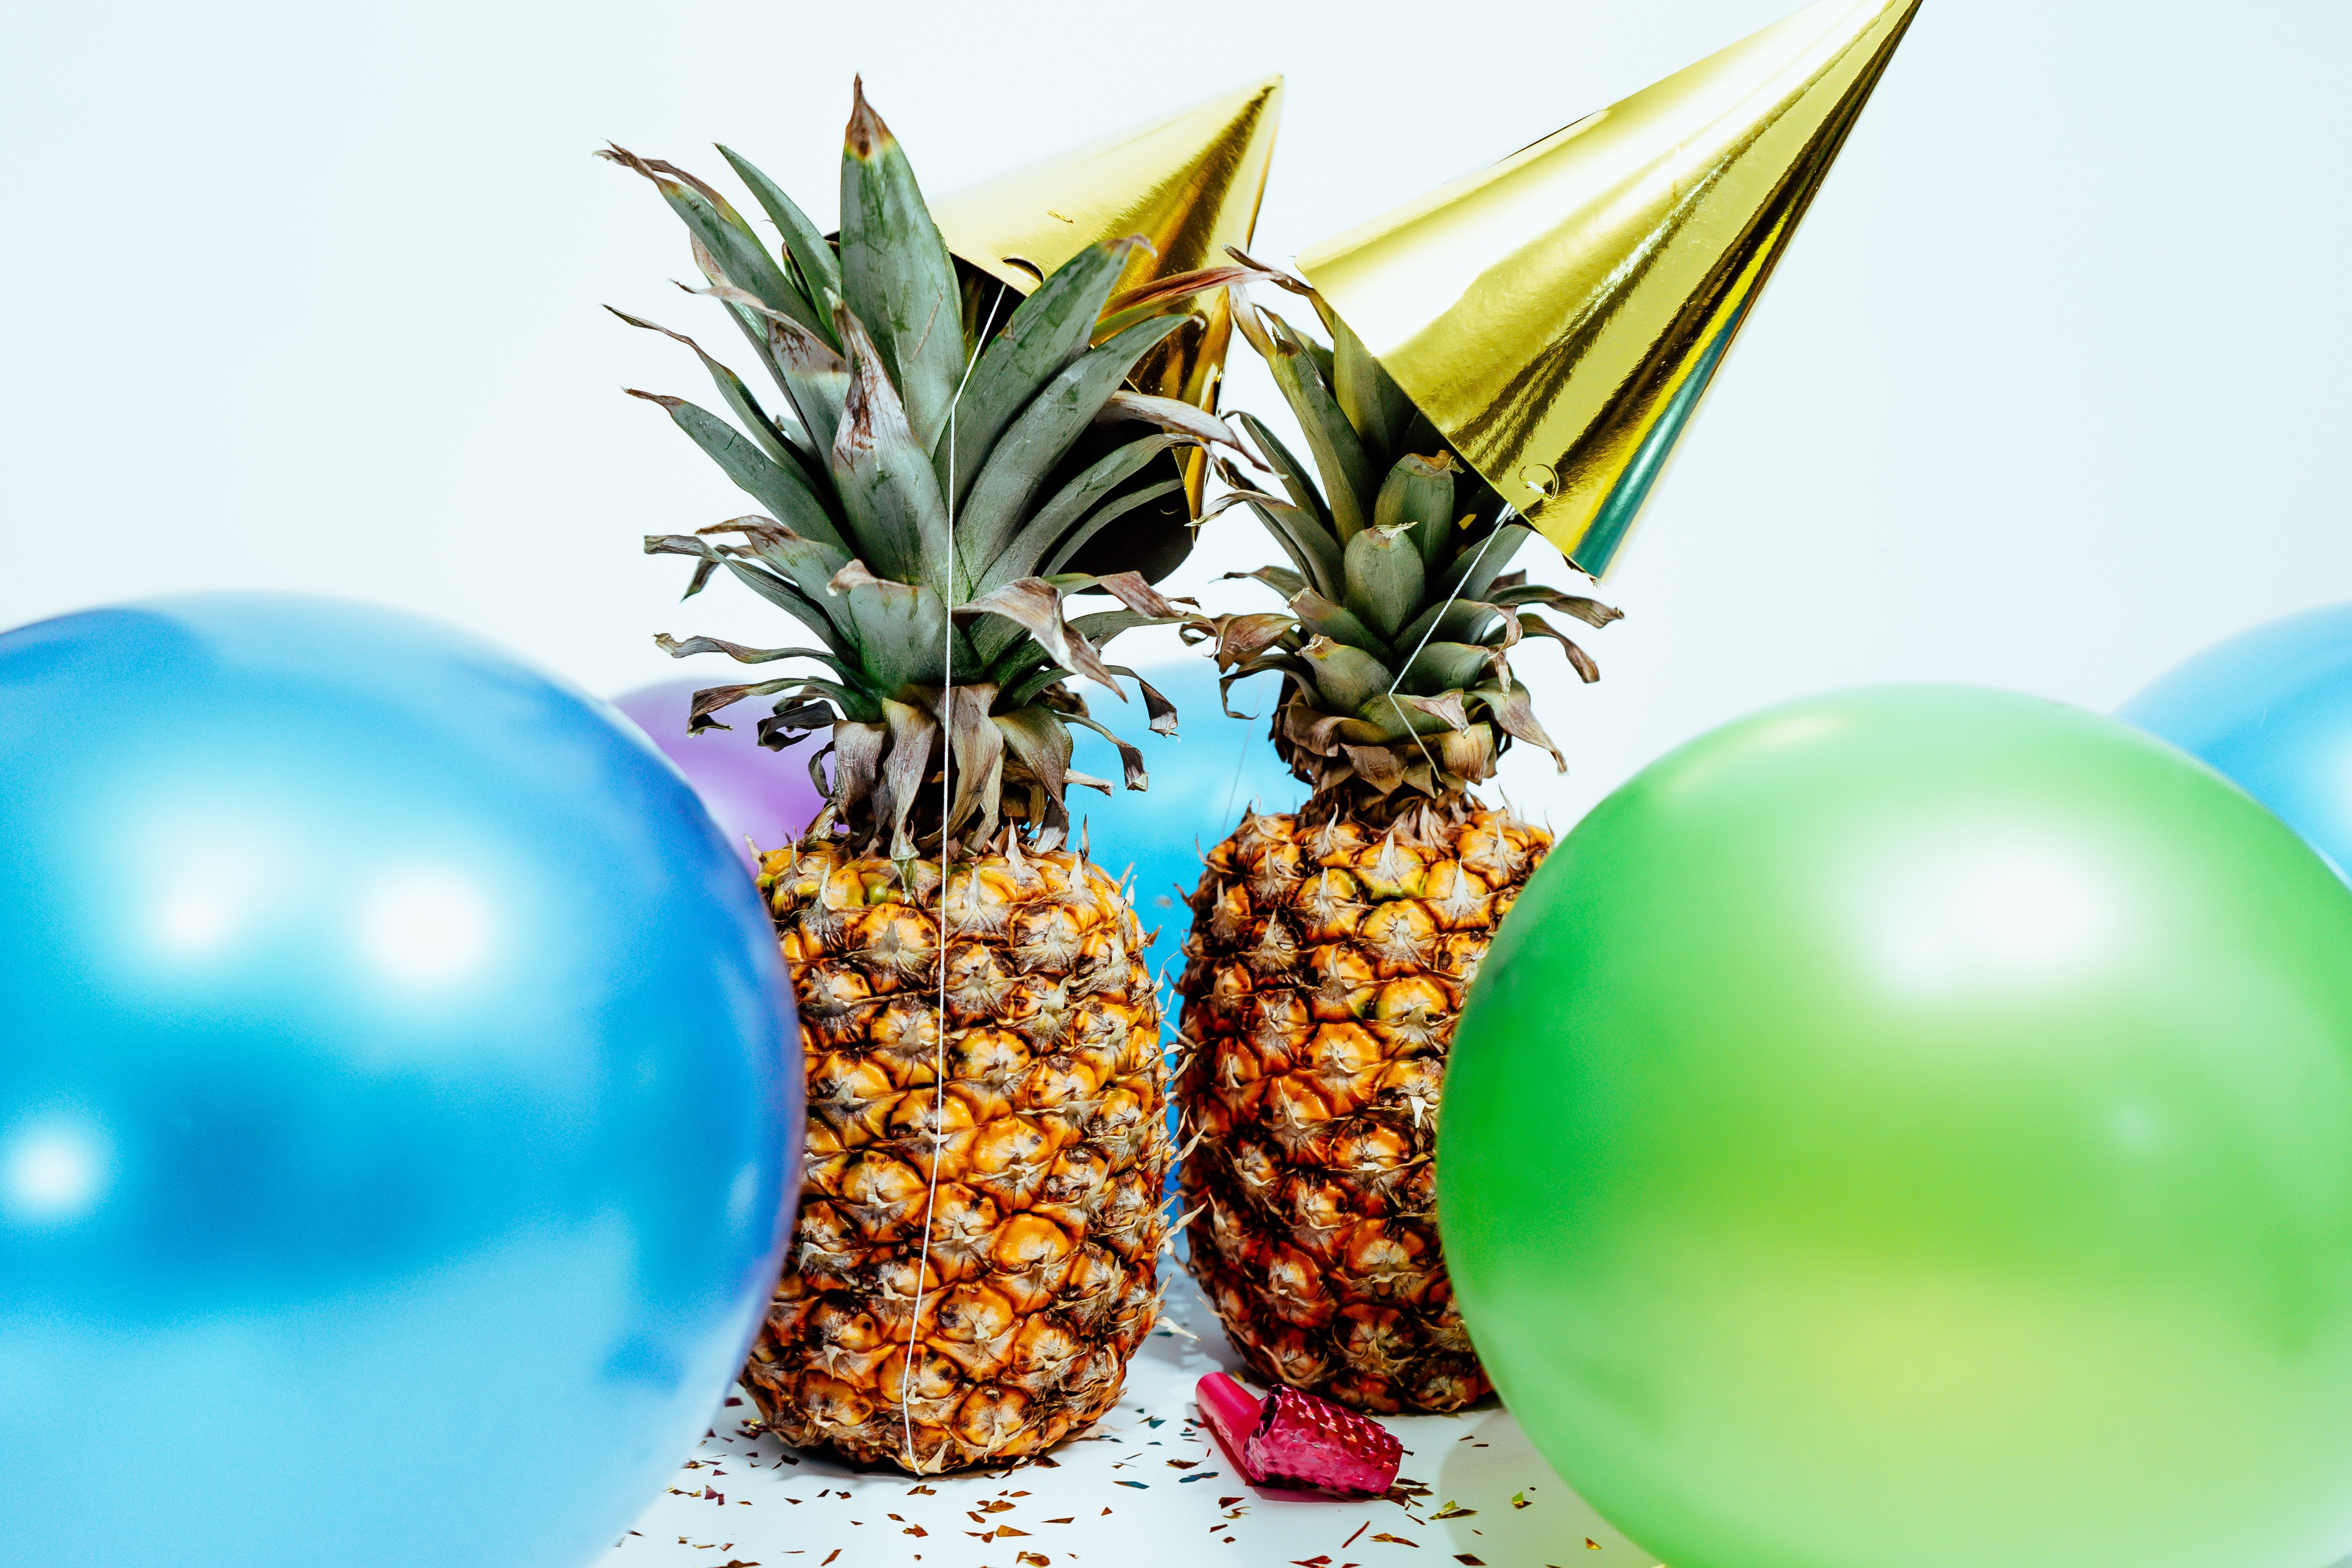 5845x3897 #confetti, #wallpaper, #tropical, #lit, #play, #funny background, #fun, #funny wallpaper, #fruit, #Free picture, #balloon, #milestone, #party, #golden, #good time, #new year, #summer, #happy, #positive, #pineapple, #party hat